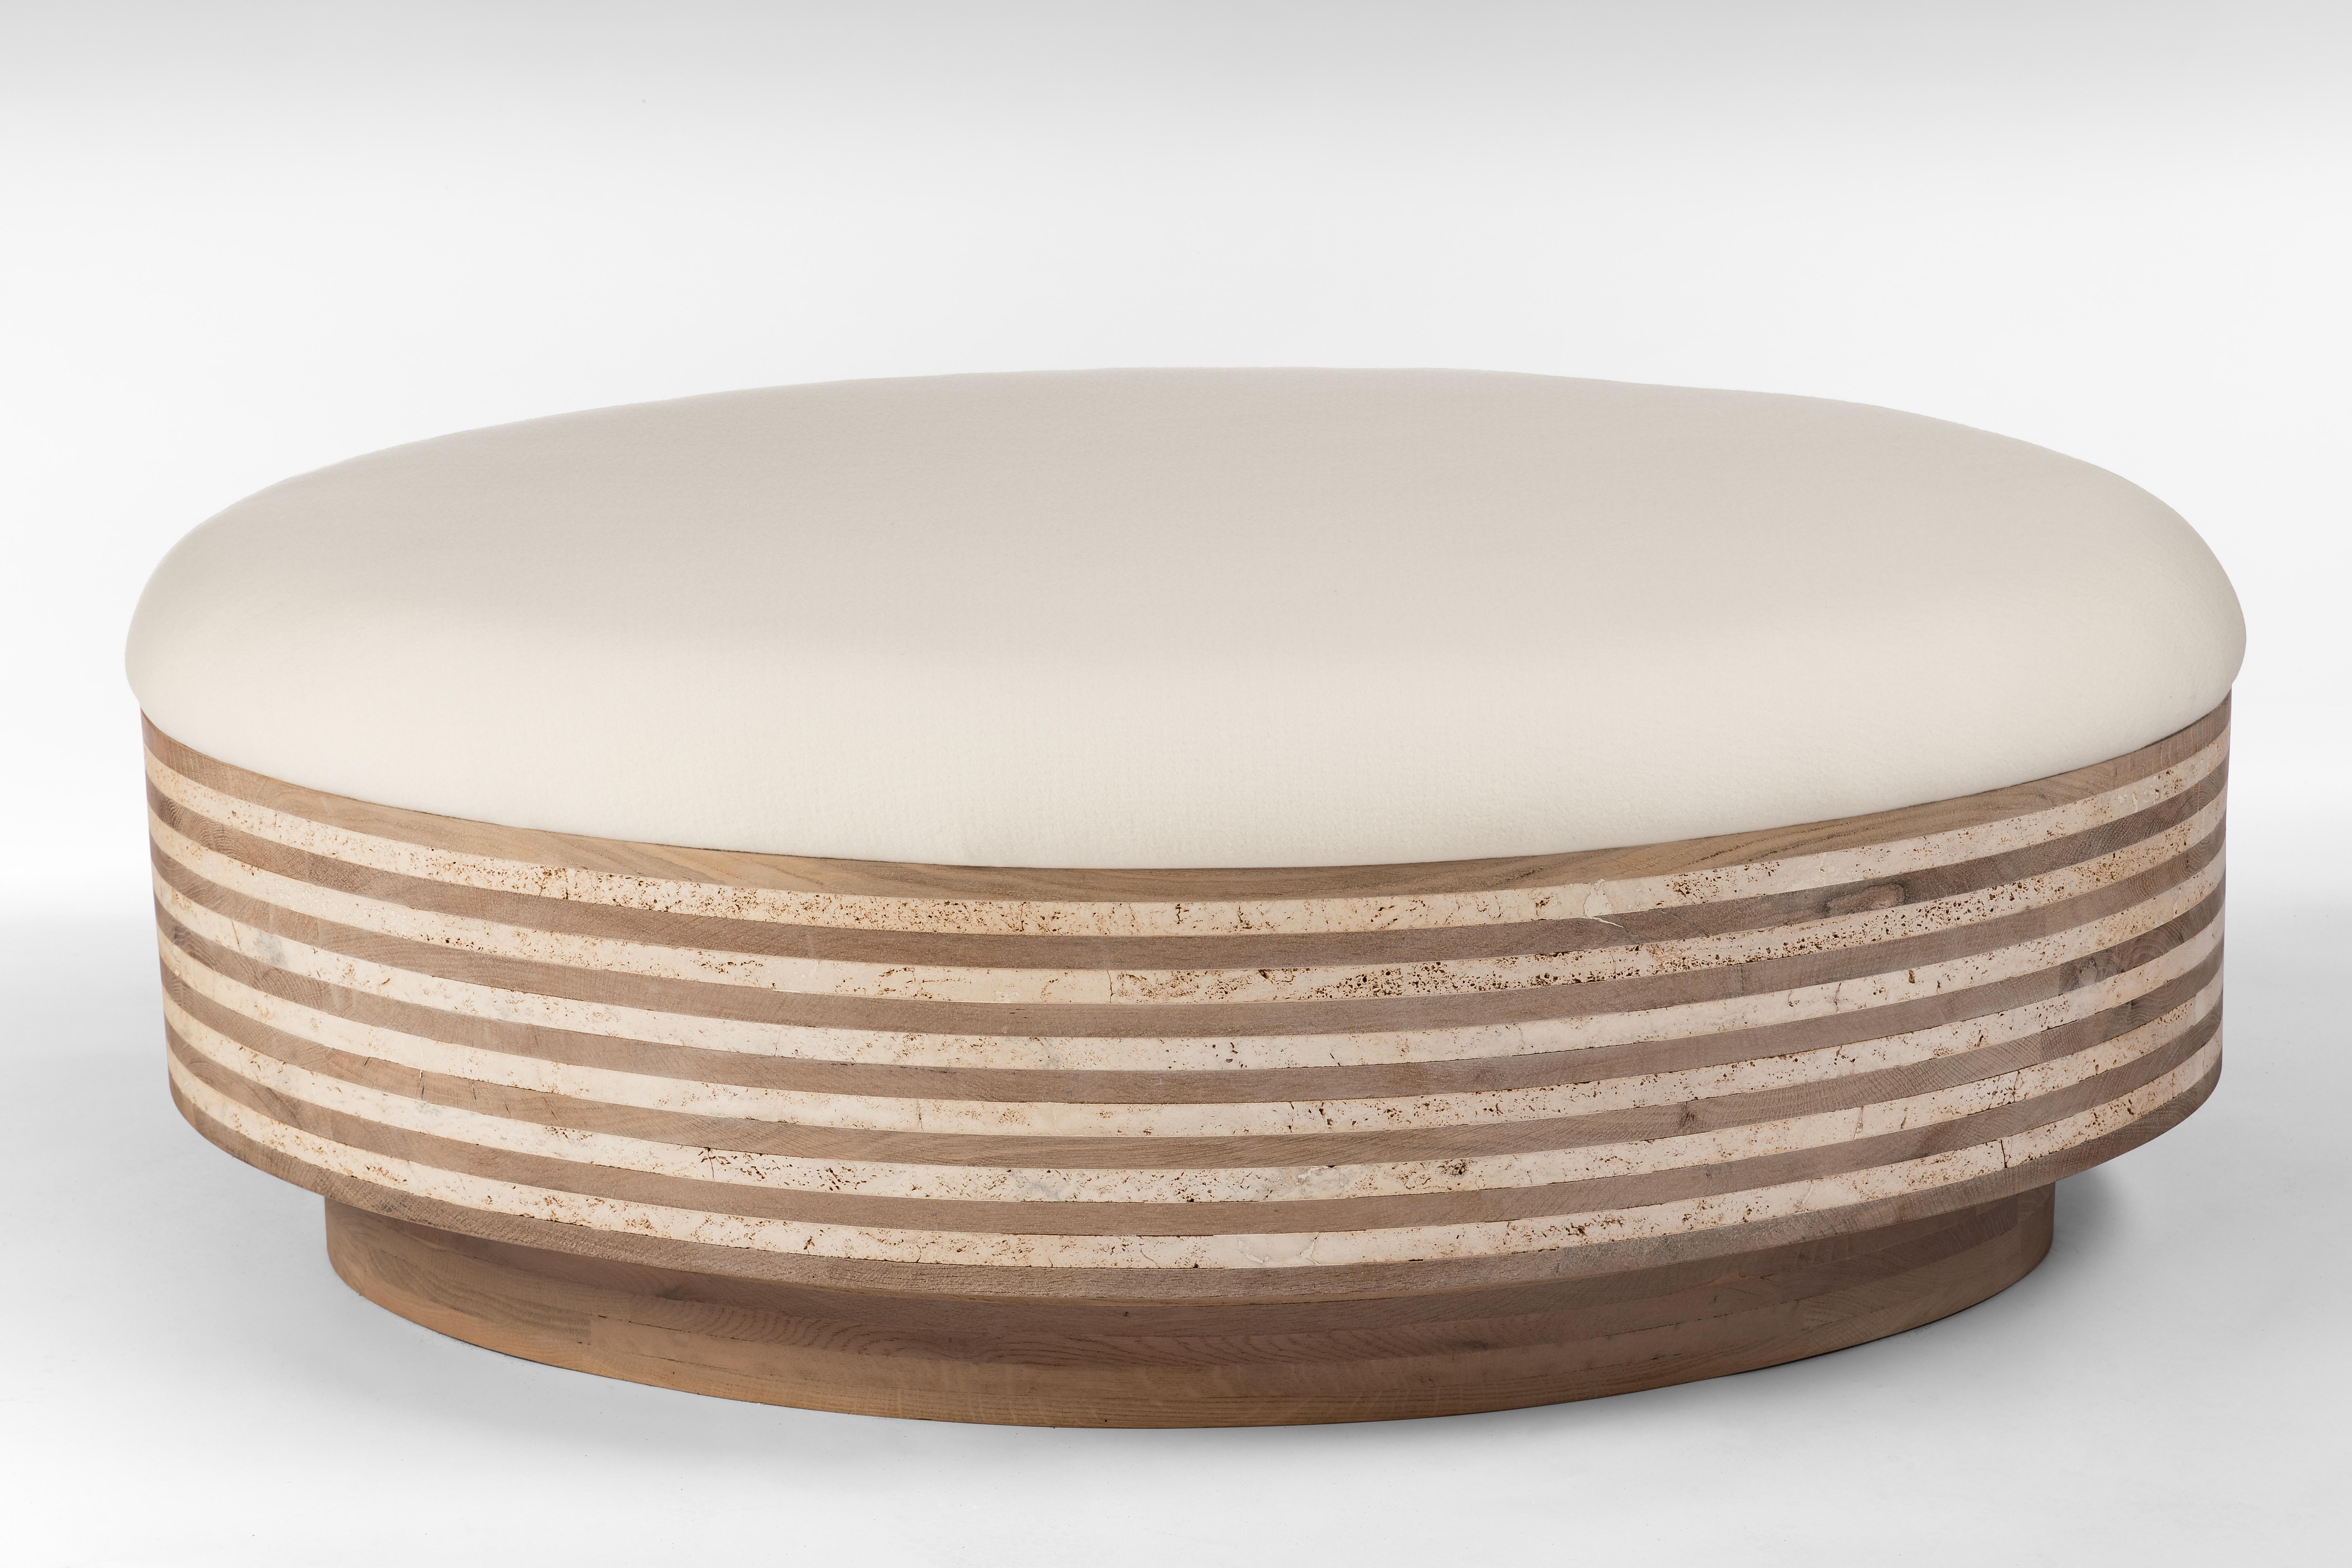 Unique travertine on oak bench sculpted by Francesco Perini
Materials: Oak, travertine, cashmere wool blend
Dimensions: W 130 x D 90 x H 50 cm

Following a creative path that grew out of the founding of a company, I Vassalletti, known the world